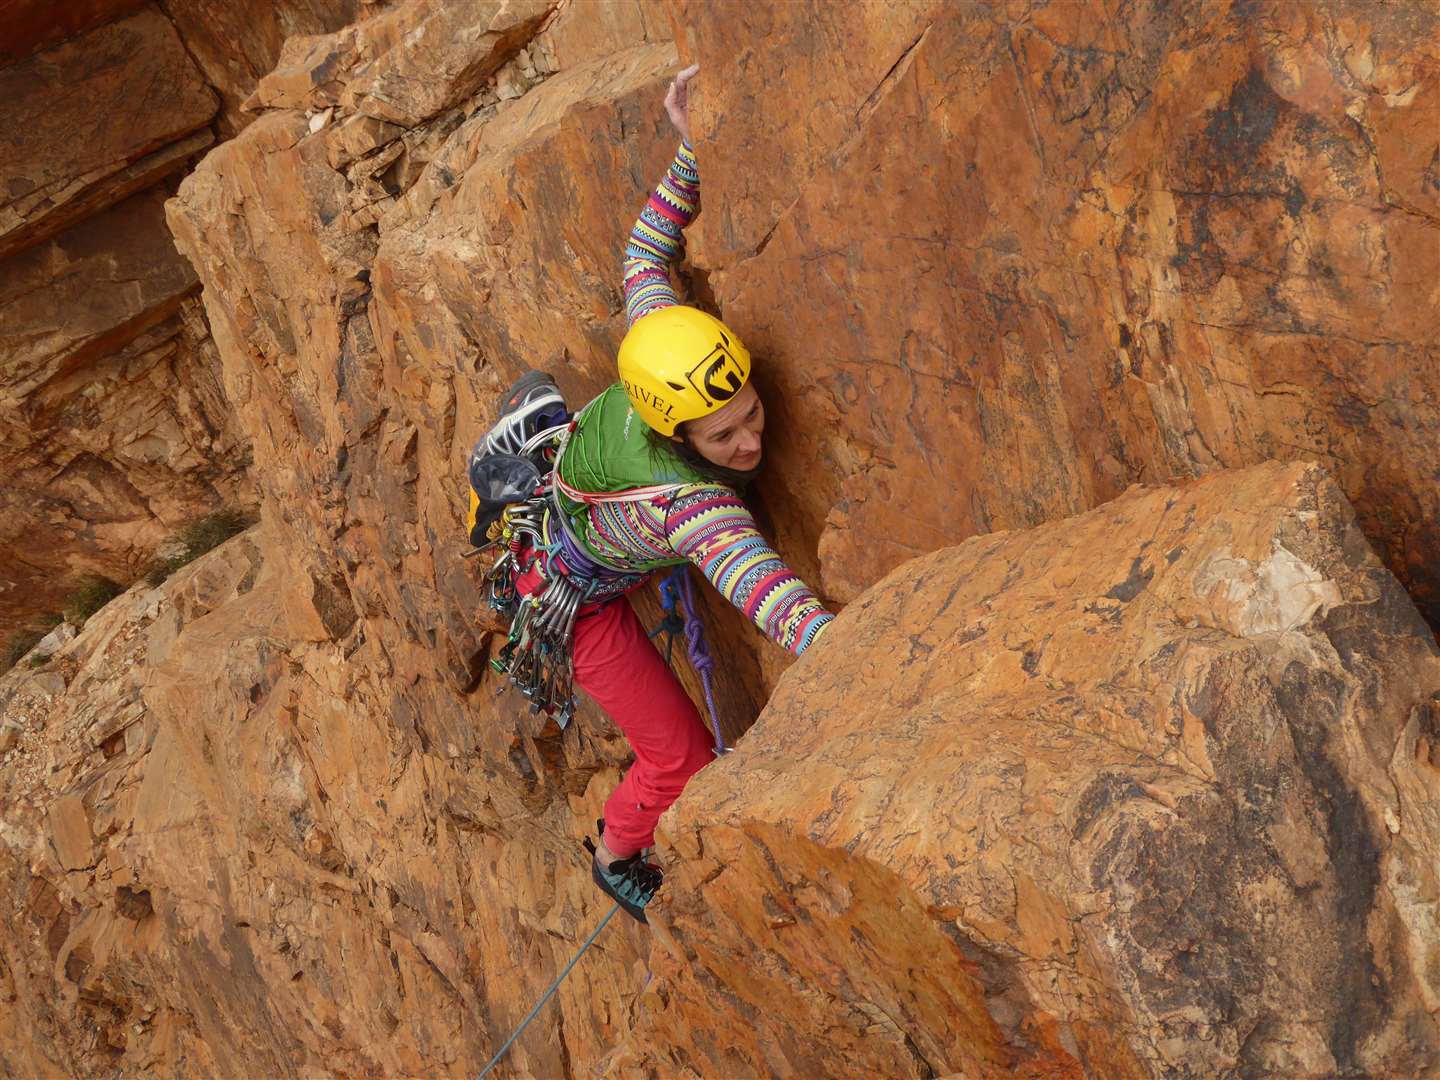 Natalie Cheeseman on a climb called Guillotine Direct in the Anti-Atlas Mountains of Morocco